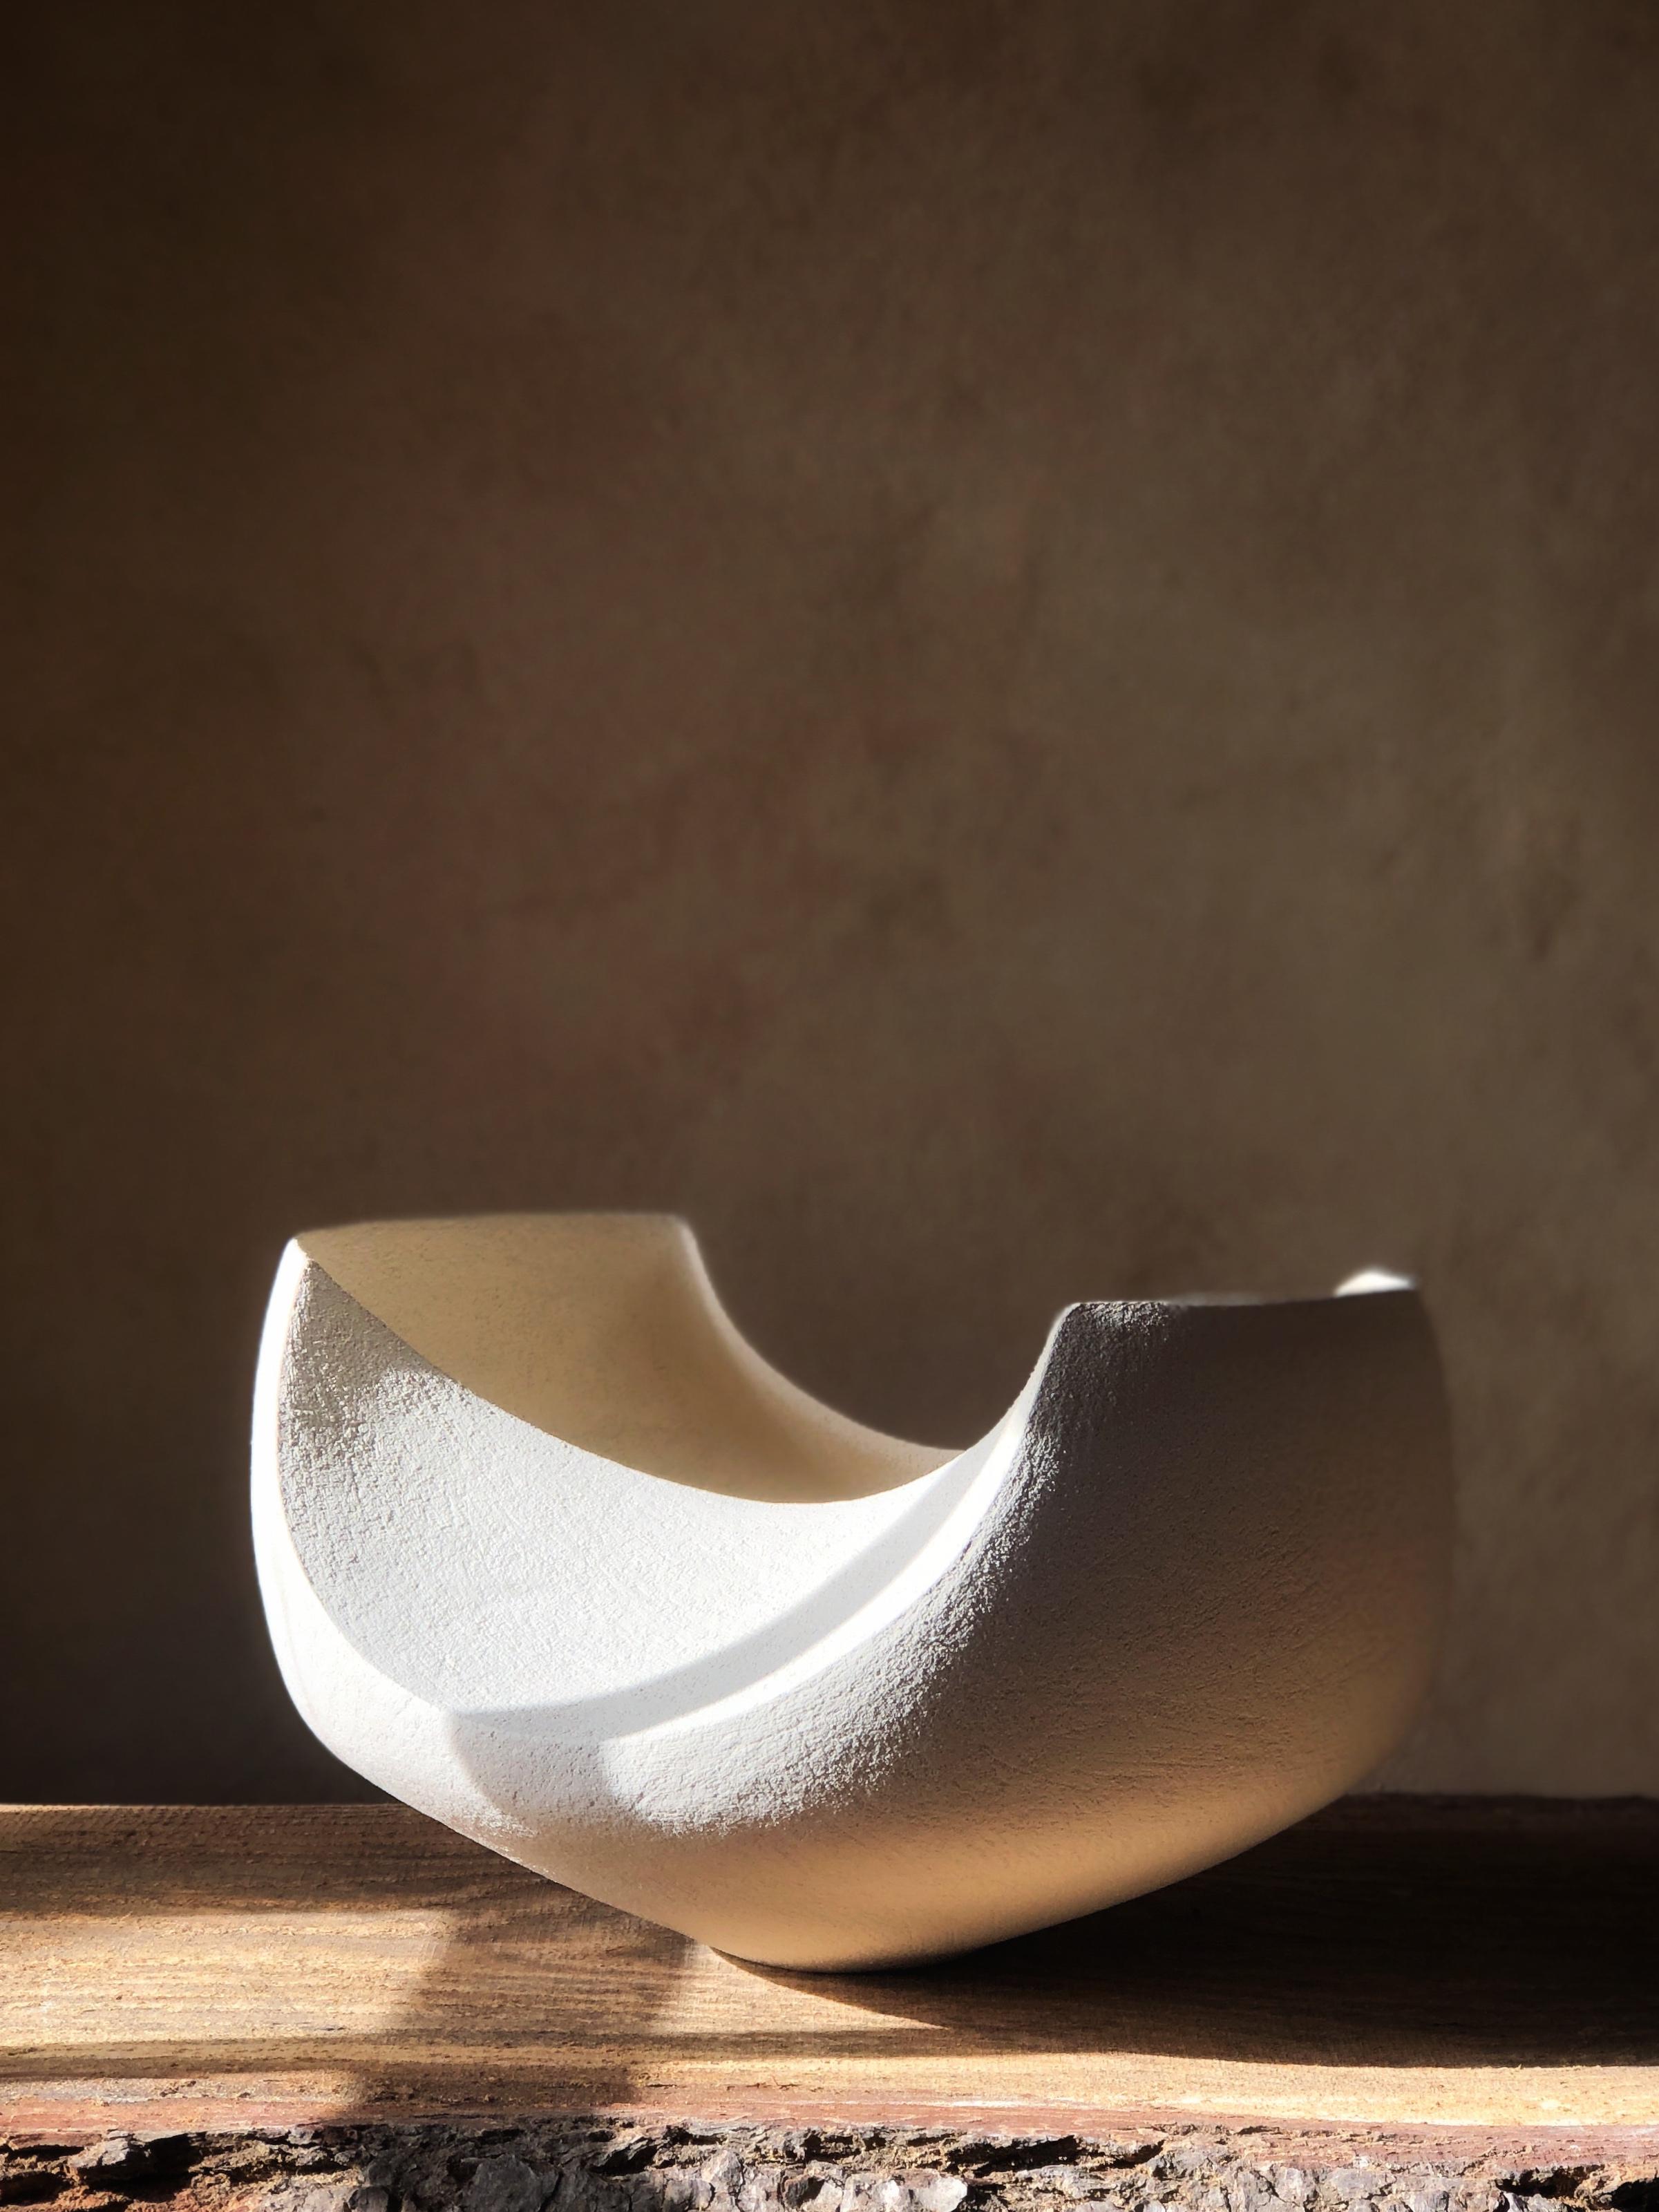 Symétrical Bowl 01 by Sophie Vaidie
One Of A Kind.
Dimensions: D 32 x W 33 x H 20 cm. 
Materials: Brutal Beige stoneware with fine chamotte.

In the beginning, there was a need to make, with the hands, the touch, the senses. Then came the desire to